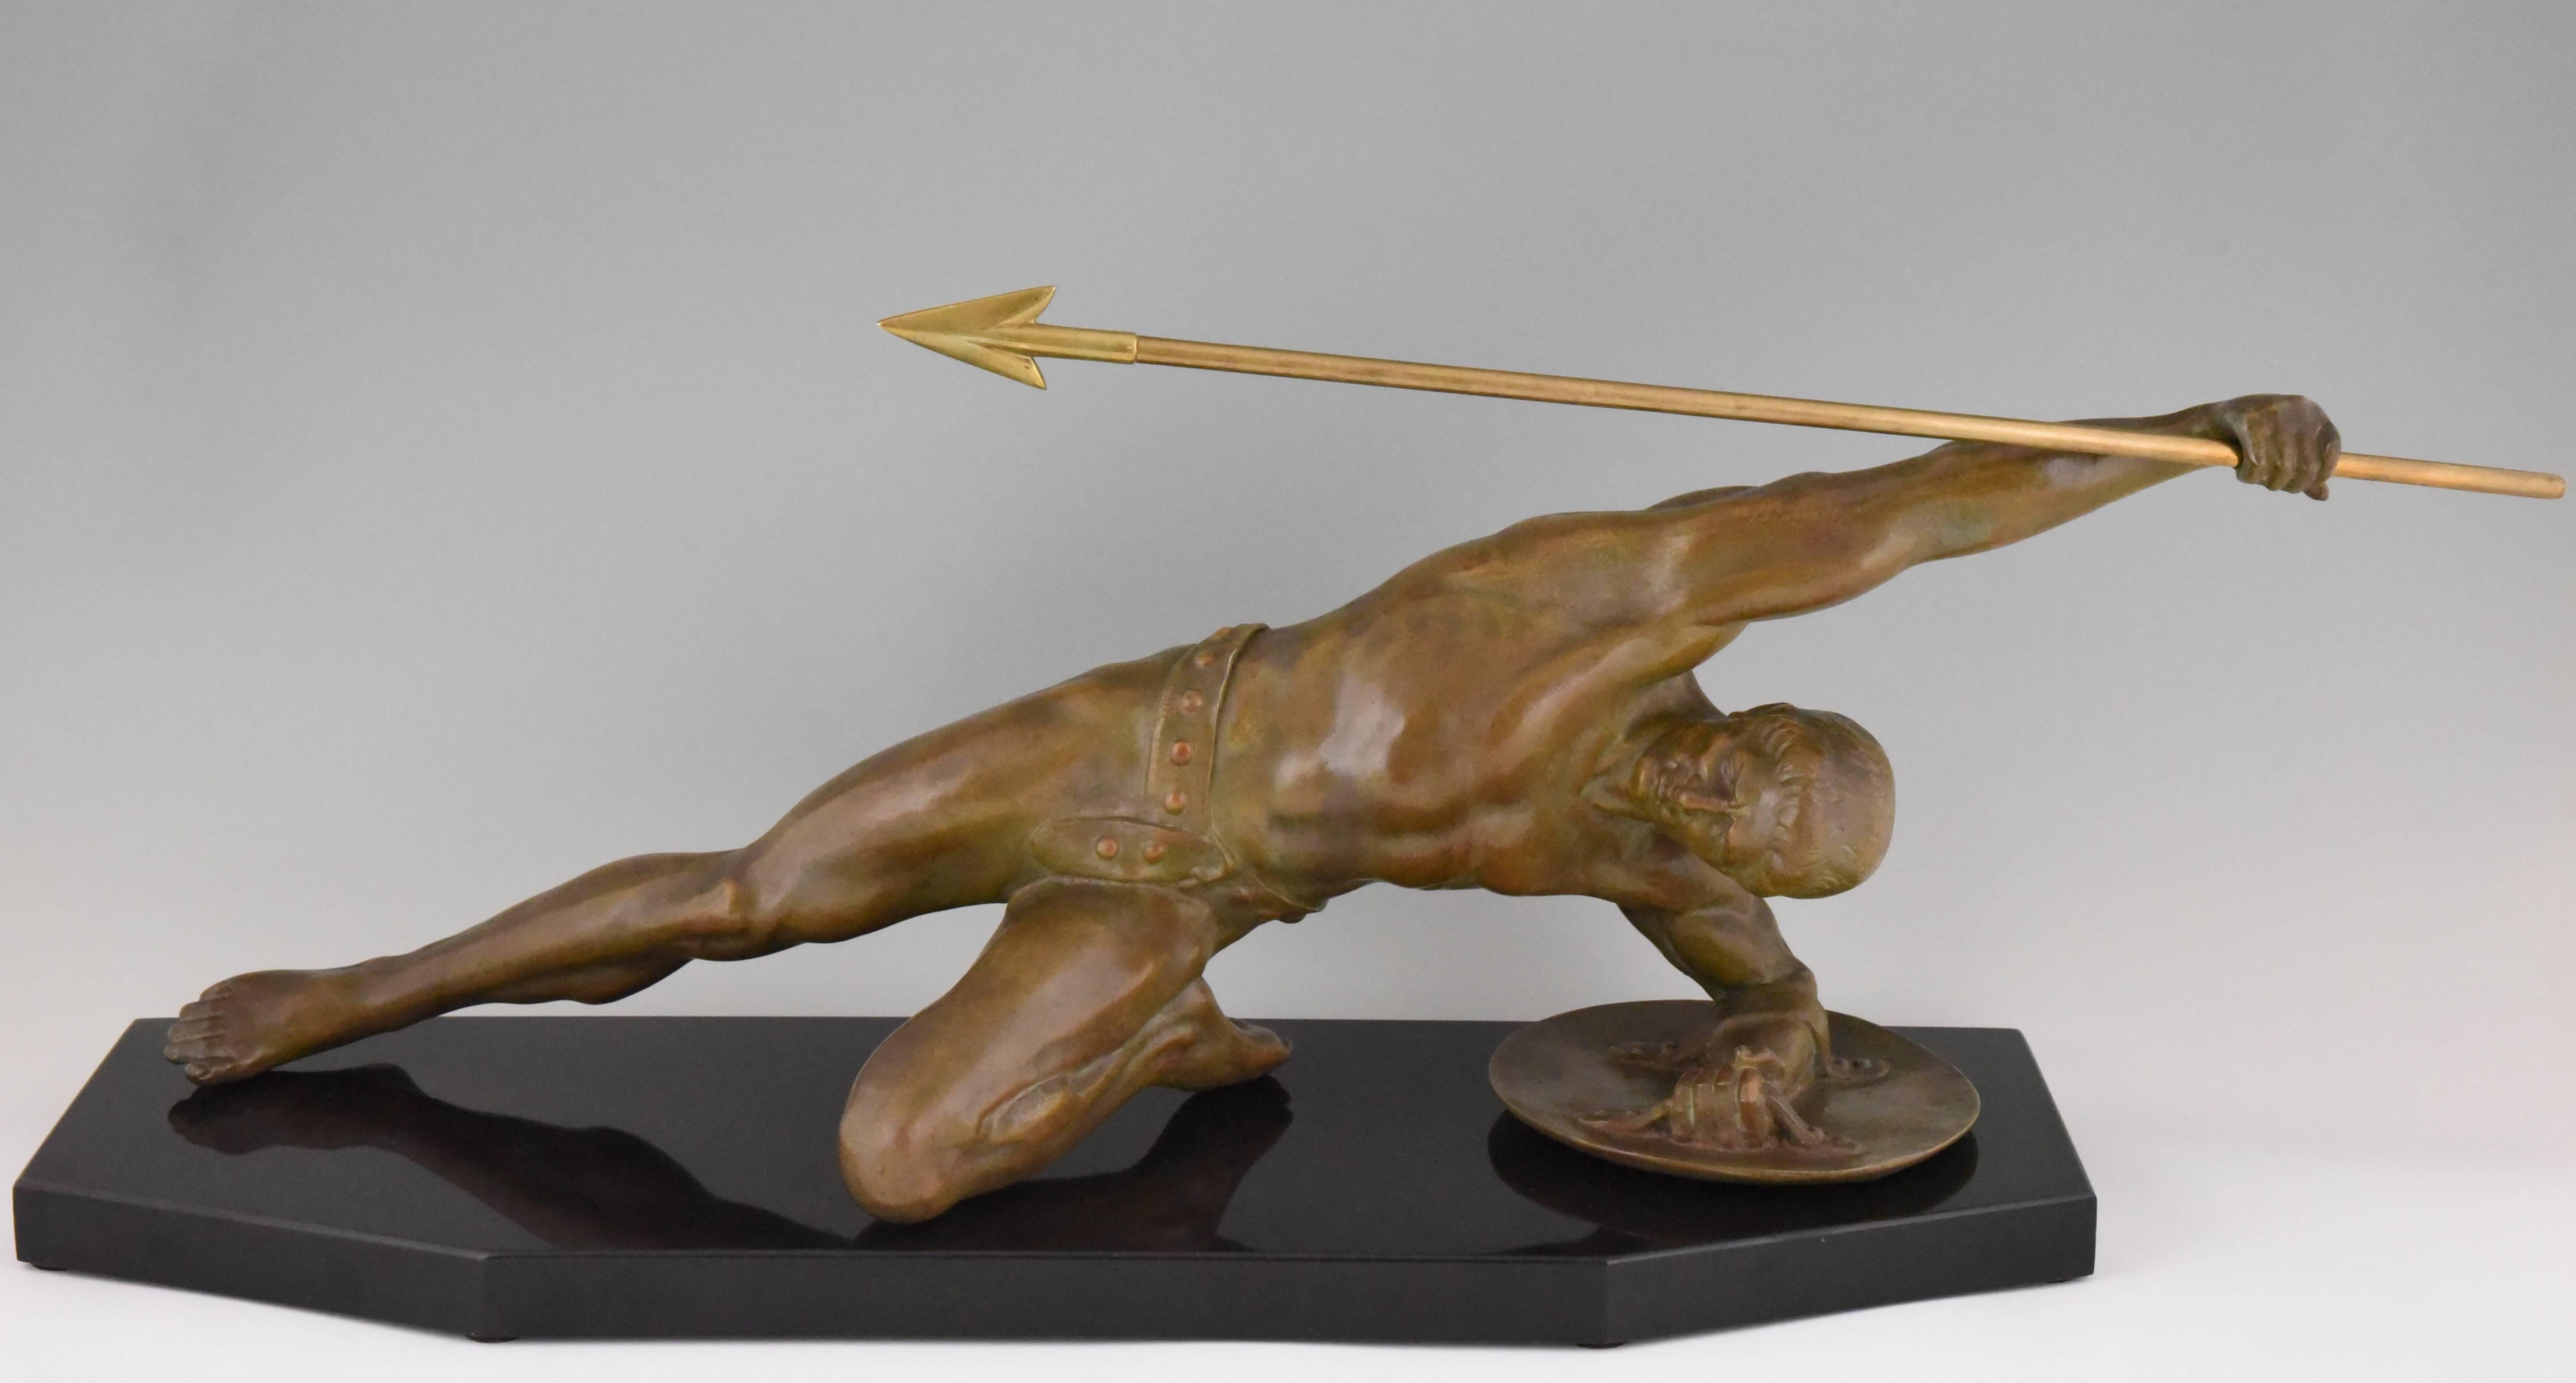 Impressive Art Deco bronze of a gladiator with spear and shield.
Artist/ Maker: Desire Grisard
Signature/ Marks: Grisard. Bronze.
Style: Art Deco.
Date: 1925.
Material: Patinated bronze. Belgian black marble base.
Origin: France
Condition: Very good